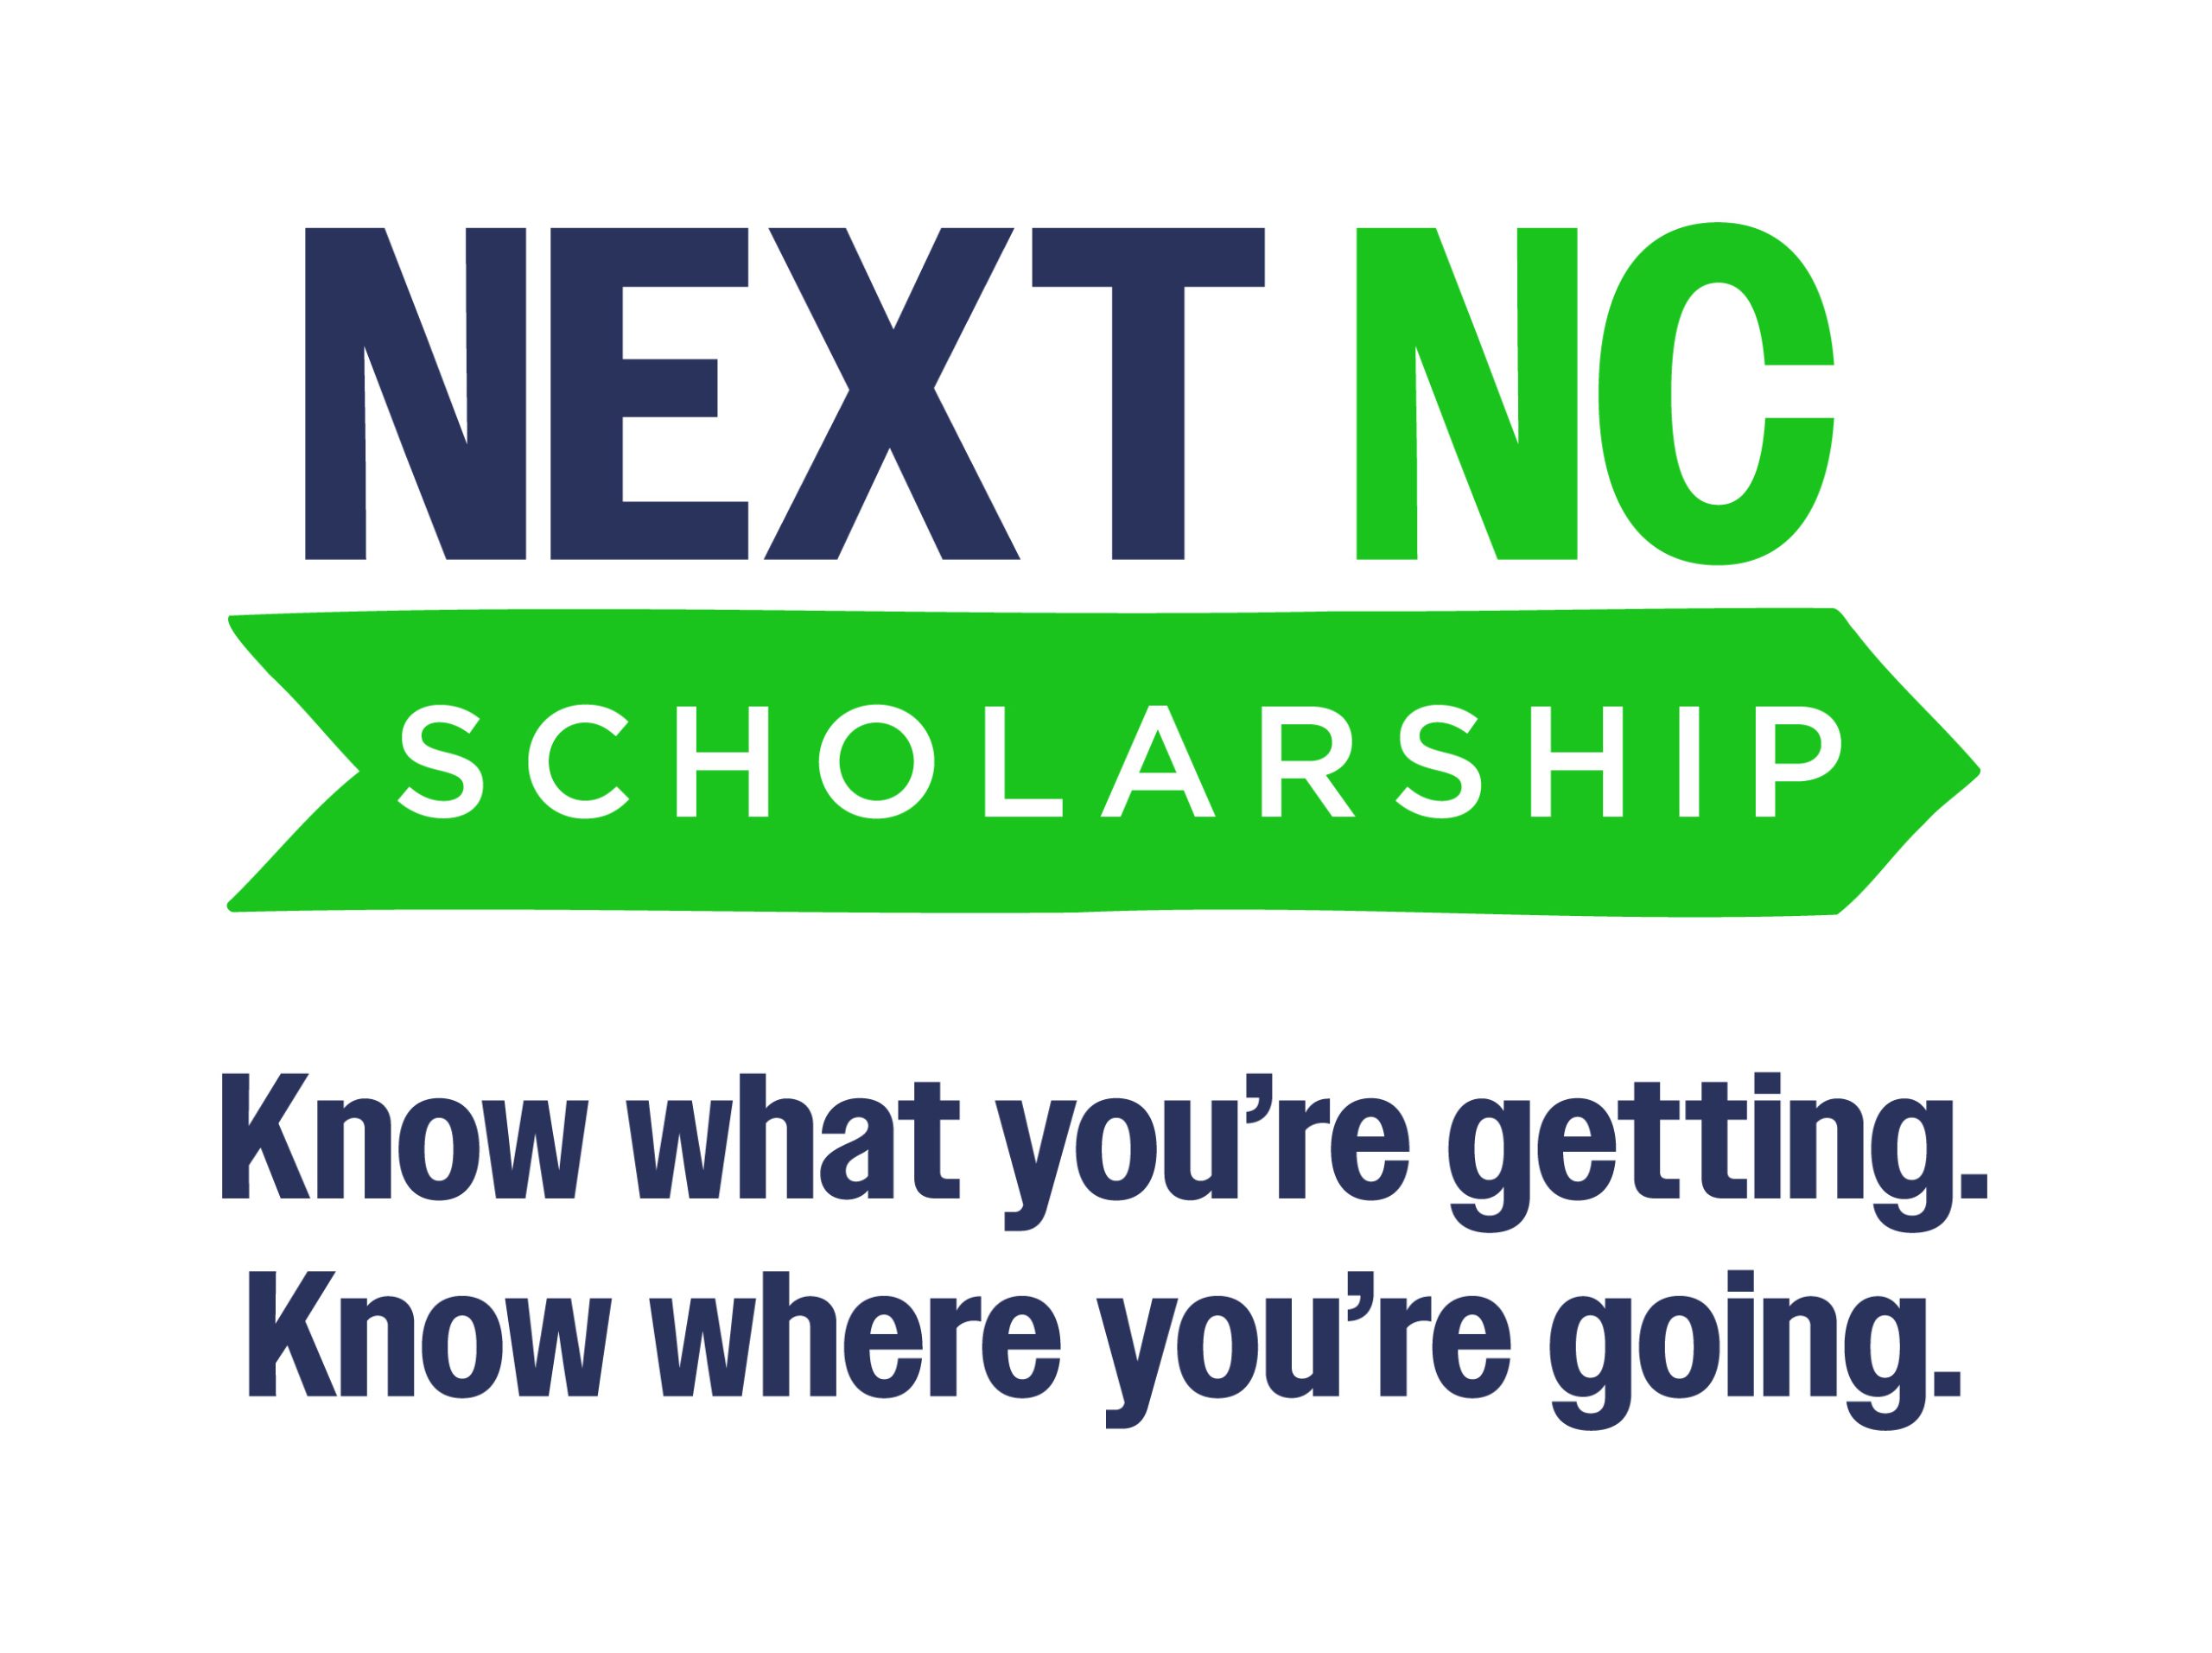 Next NC Scholarship. Know what you're getting. Know where you're going.